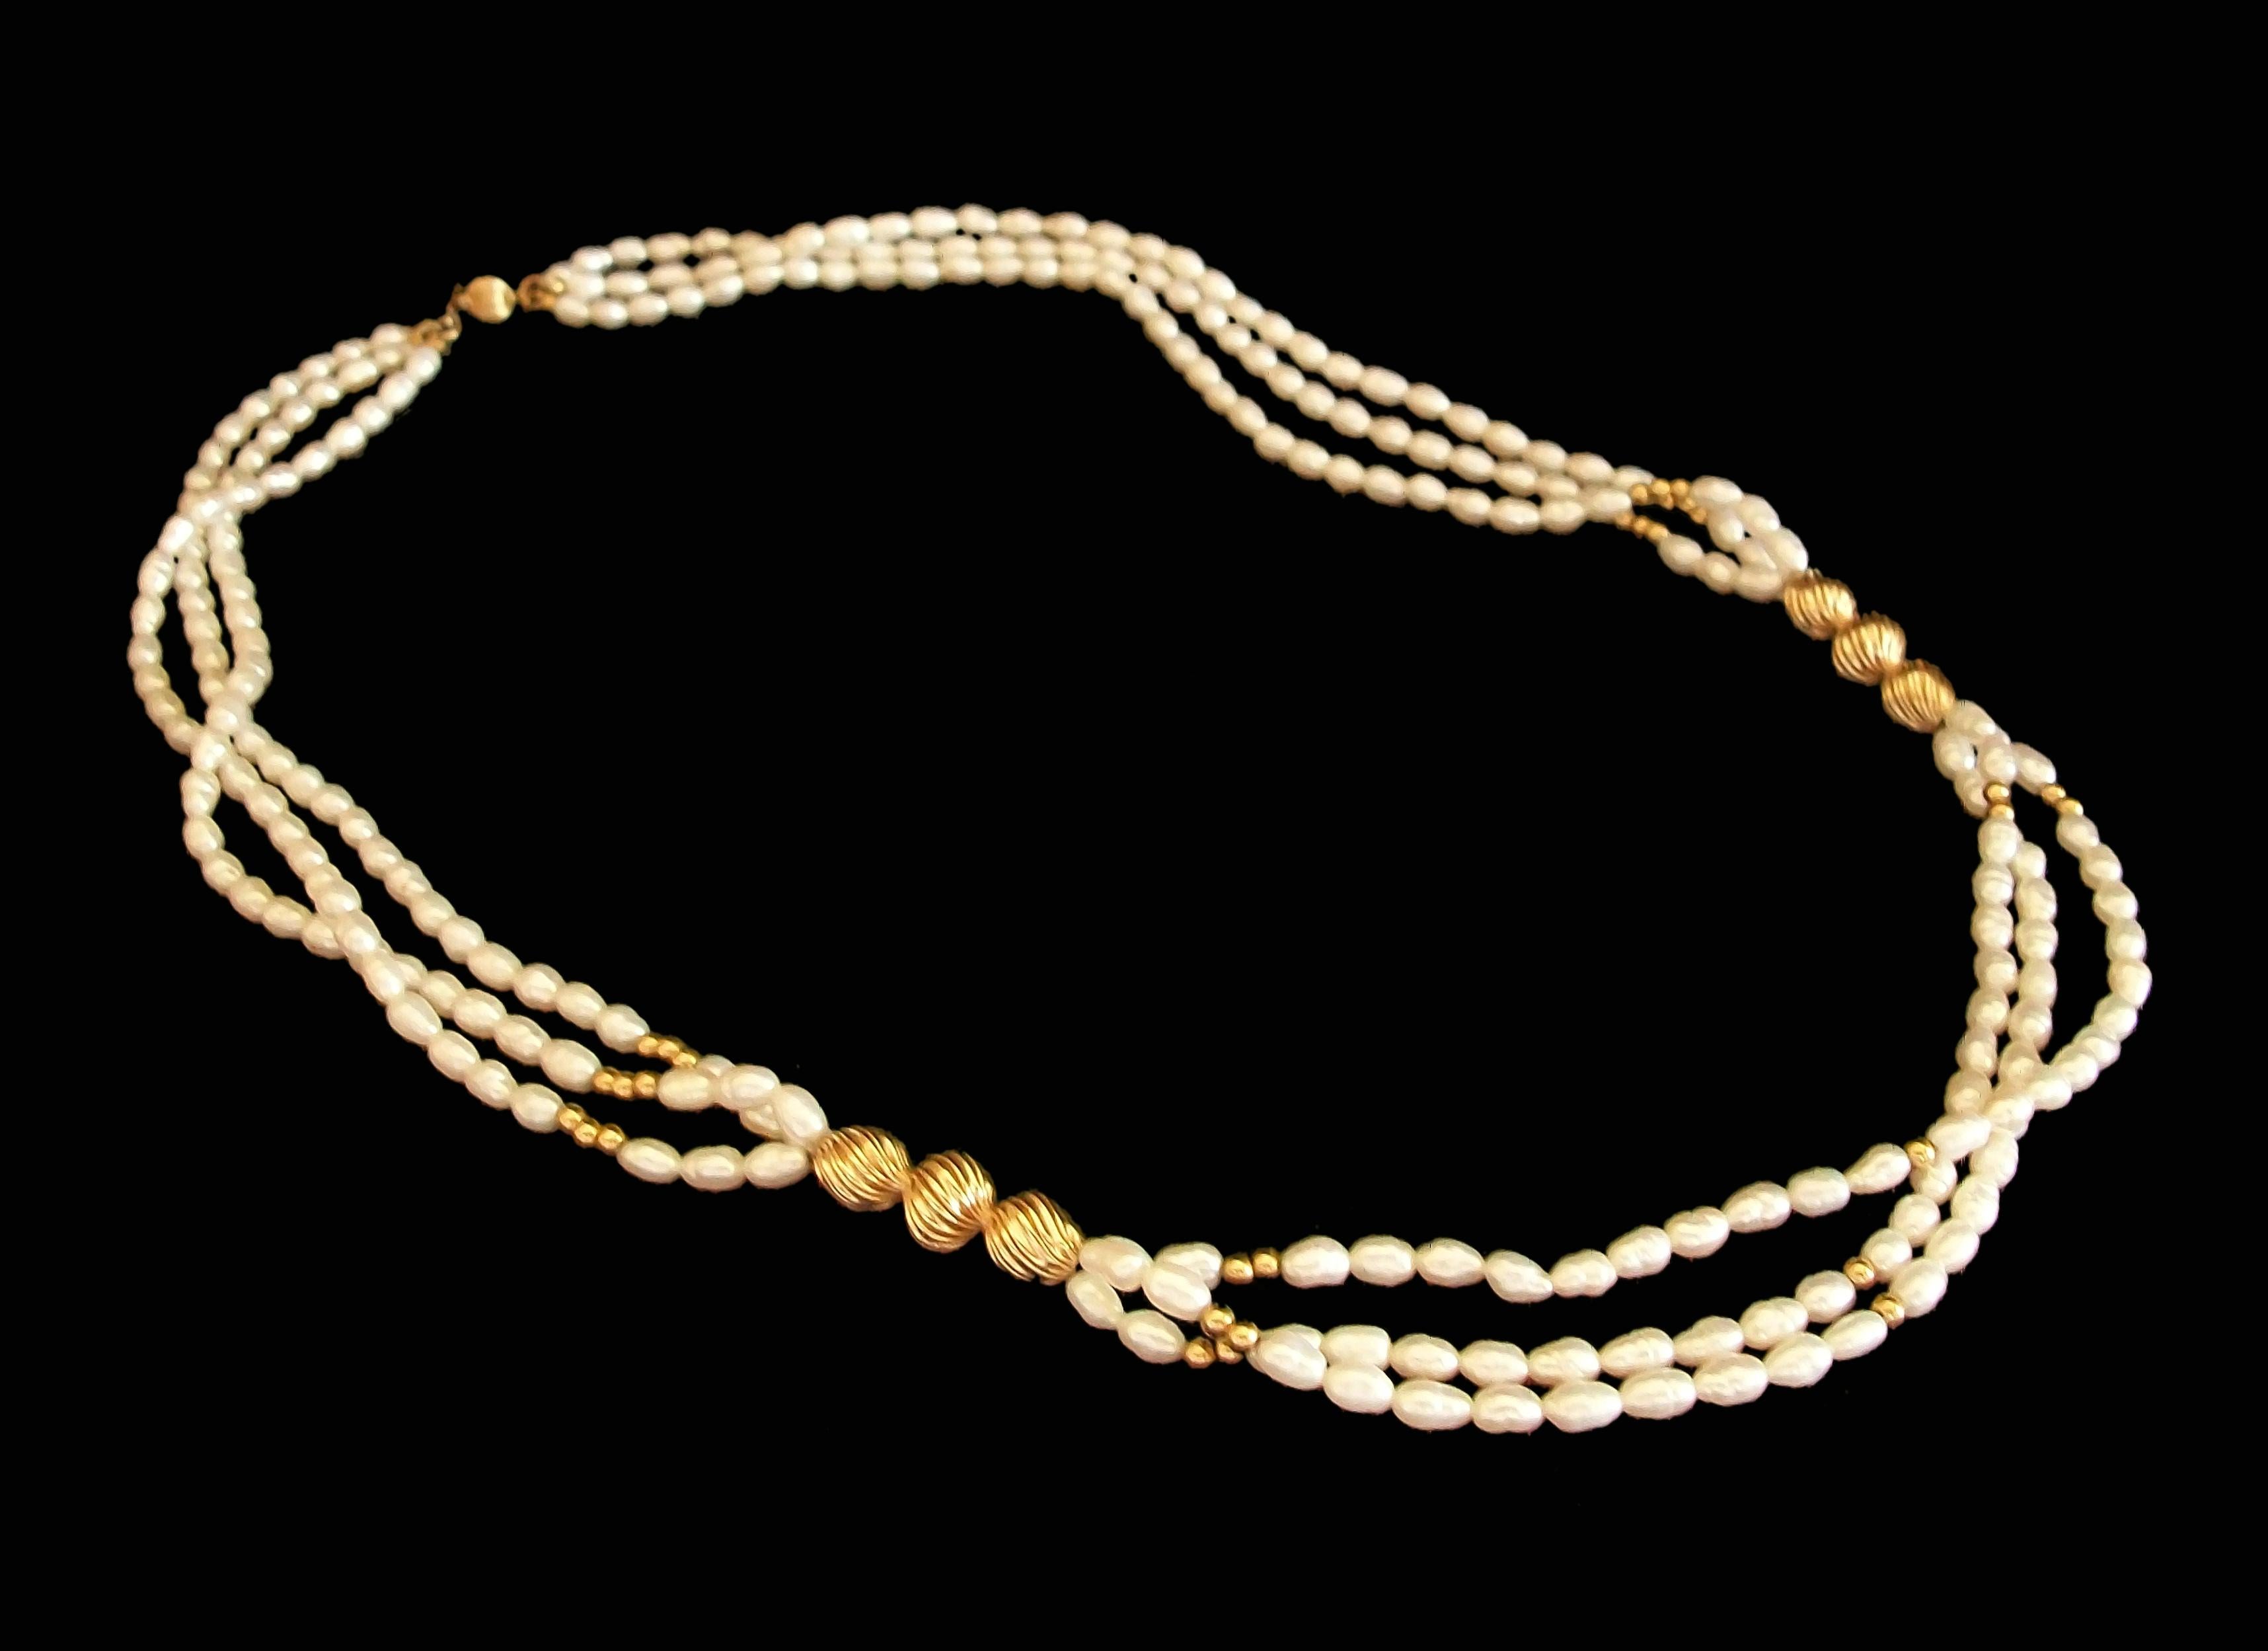 Women's Vintage Matinee Length Keshi Baroque Pearl & 14K Gold Necklace - Circa 1980's For Sale